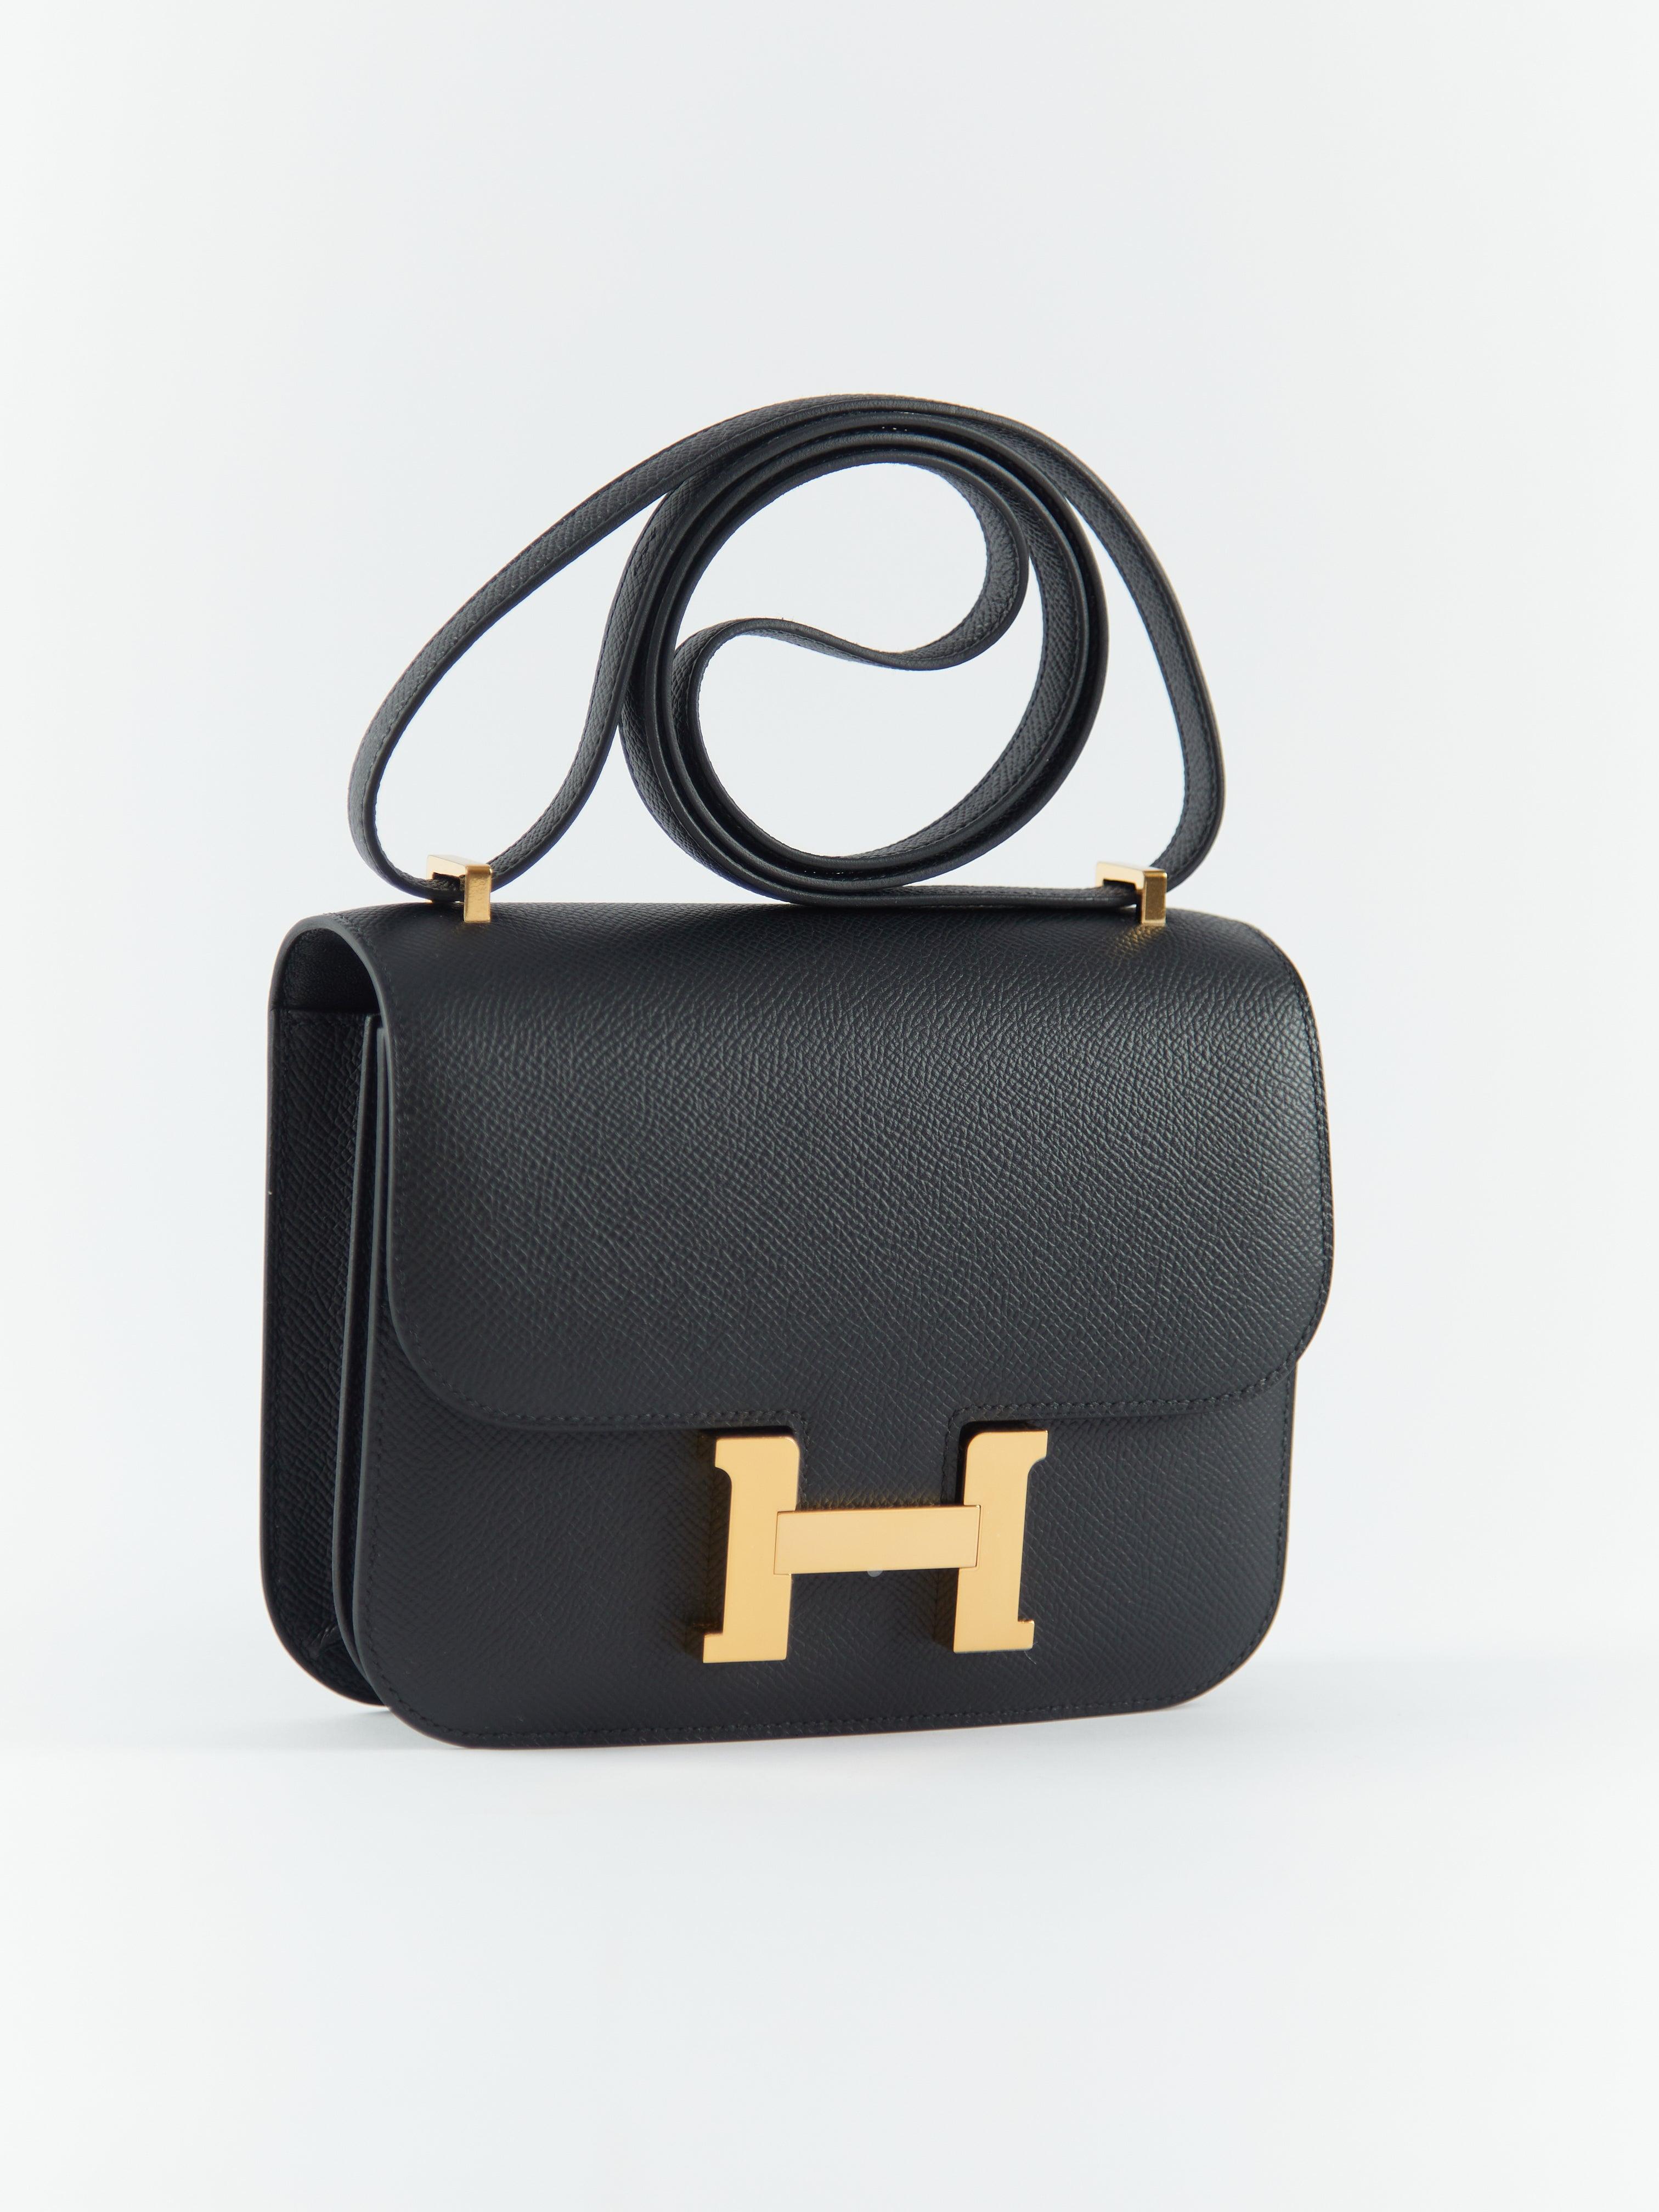 HERMÈS CONSTANCE 18CM BLACK Epsom Leather with Gold Hardware In Excellent Condition For Sale In London, GB